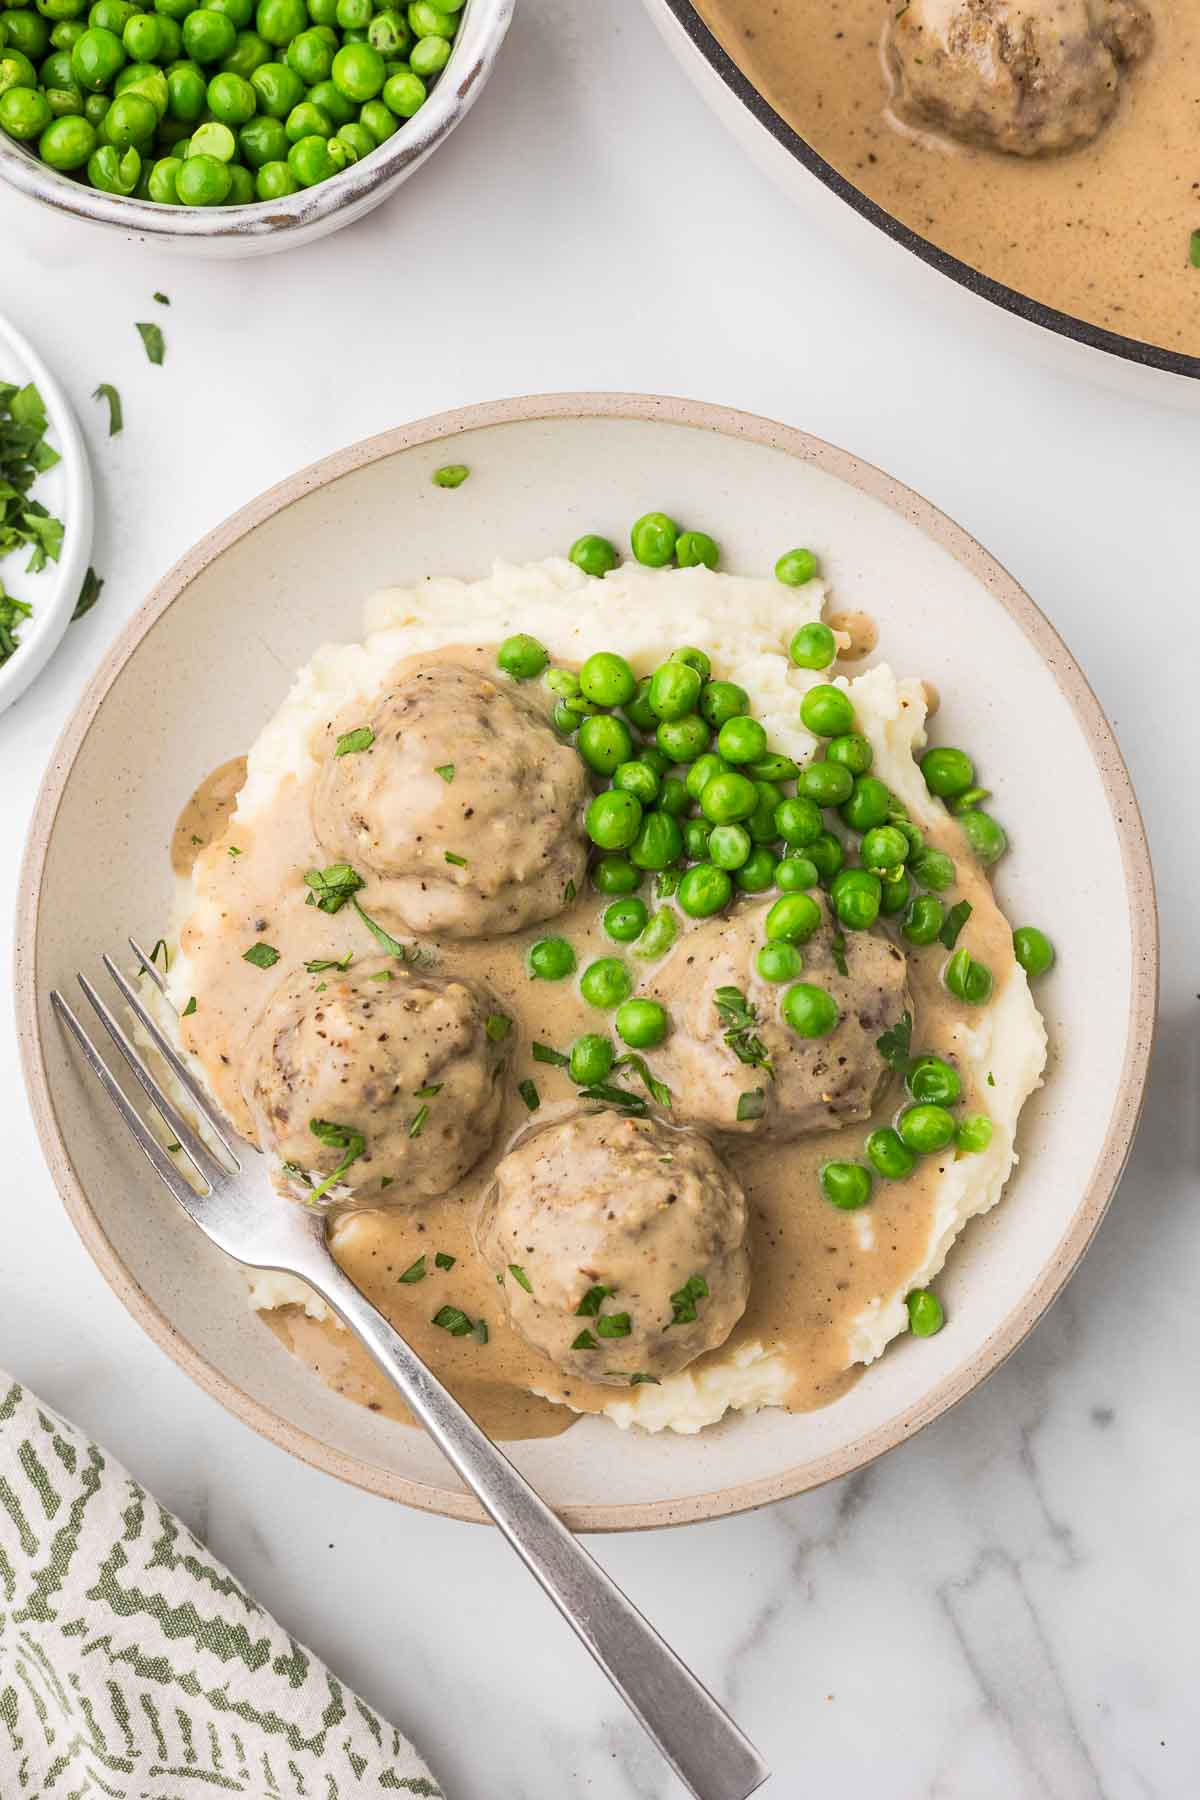 Swedish meatballs served over mashed potatoes and a sprinkle of green peas.